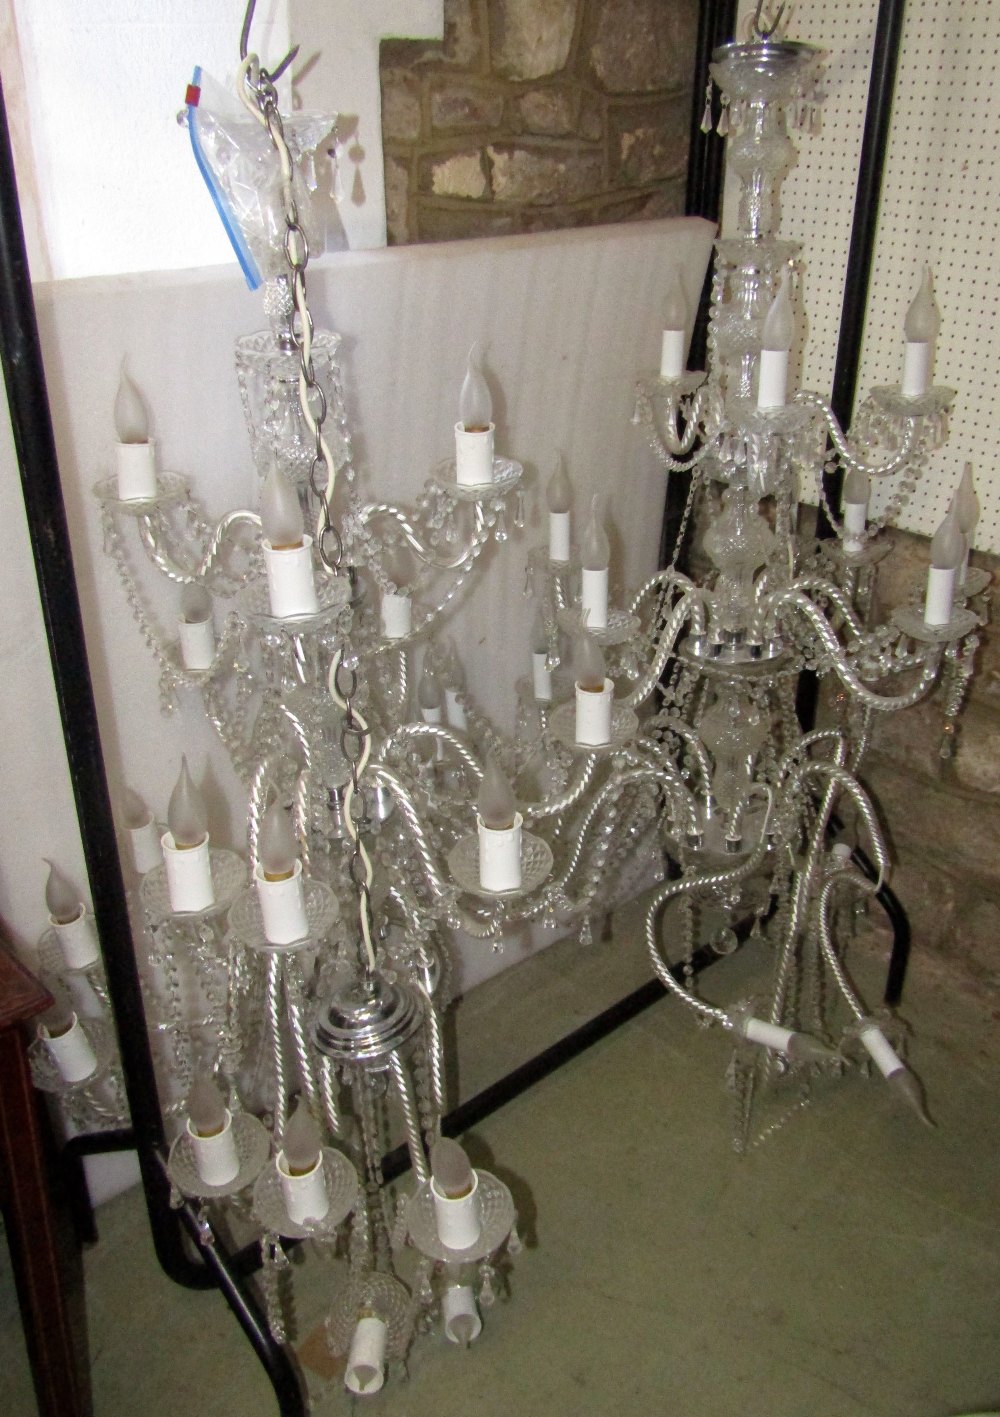 A pair of impressive moulded glass chandeliers (electrified), the faceted stems supporting